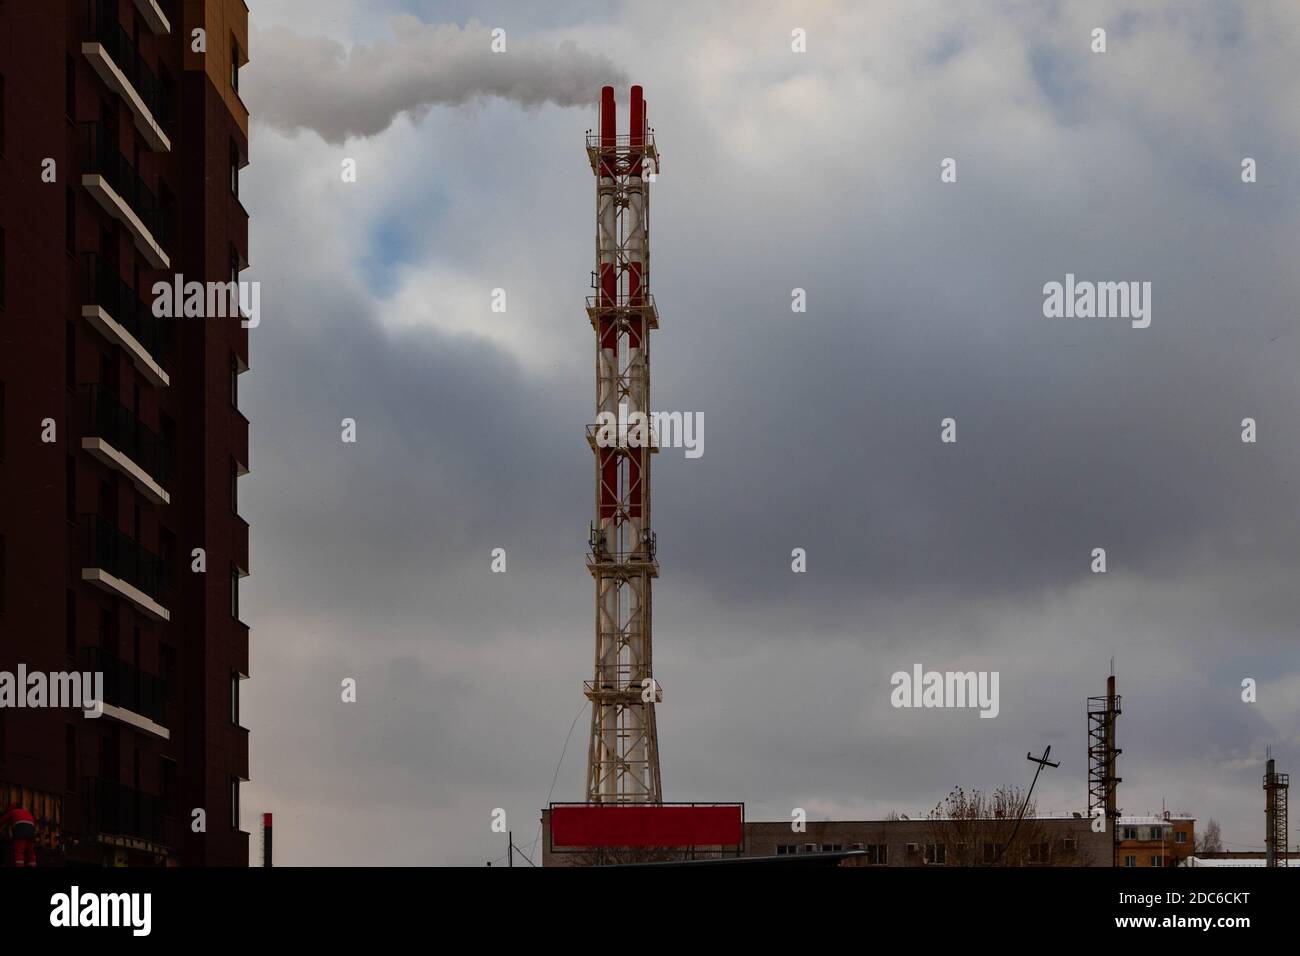 The cityscape, the high chimney boiler room against the sky. Stock Photo